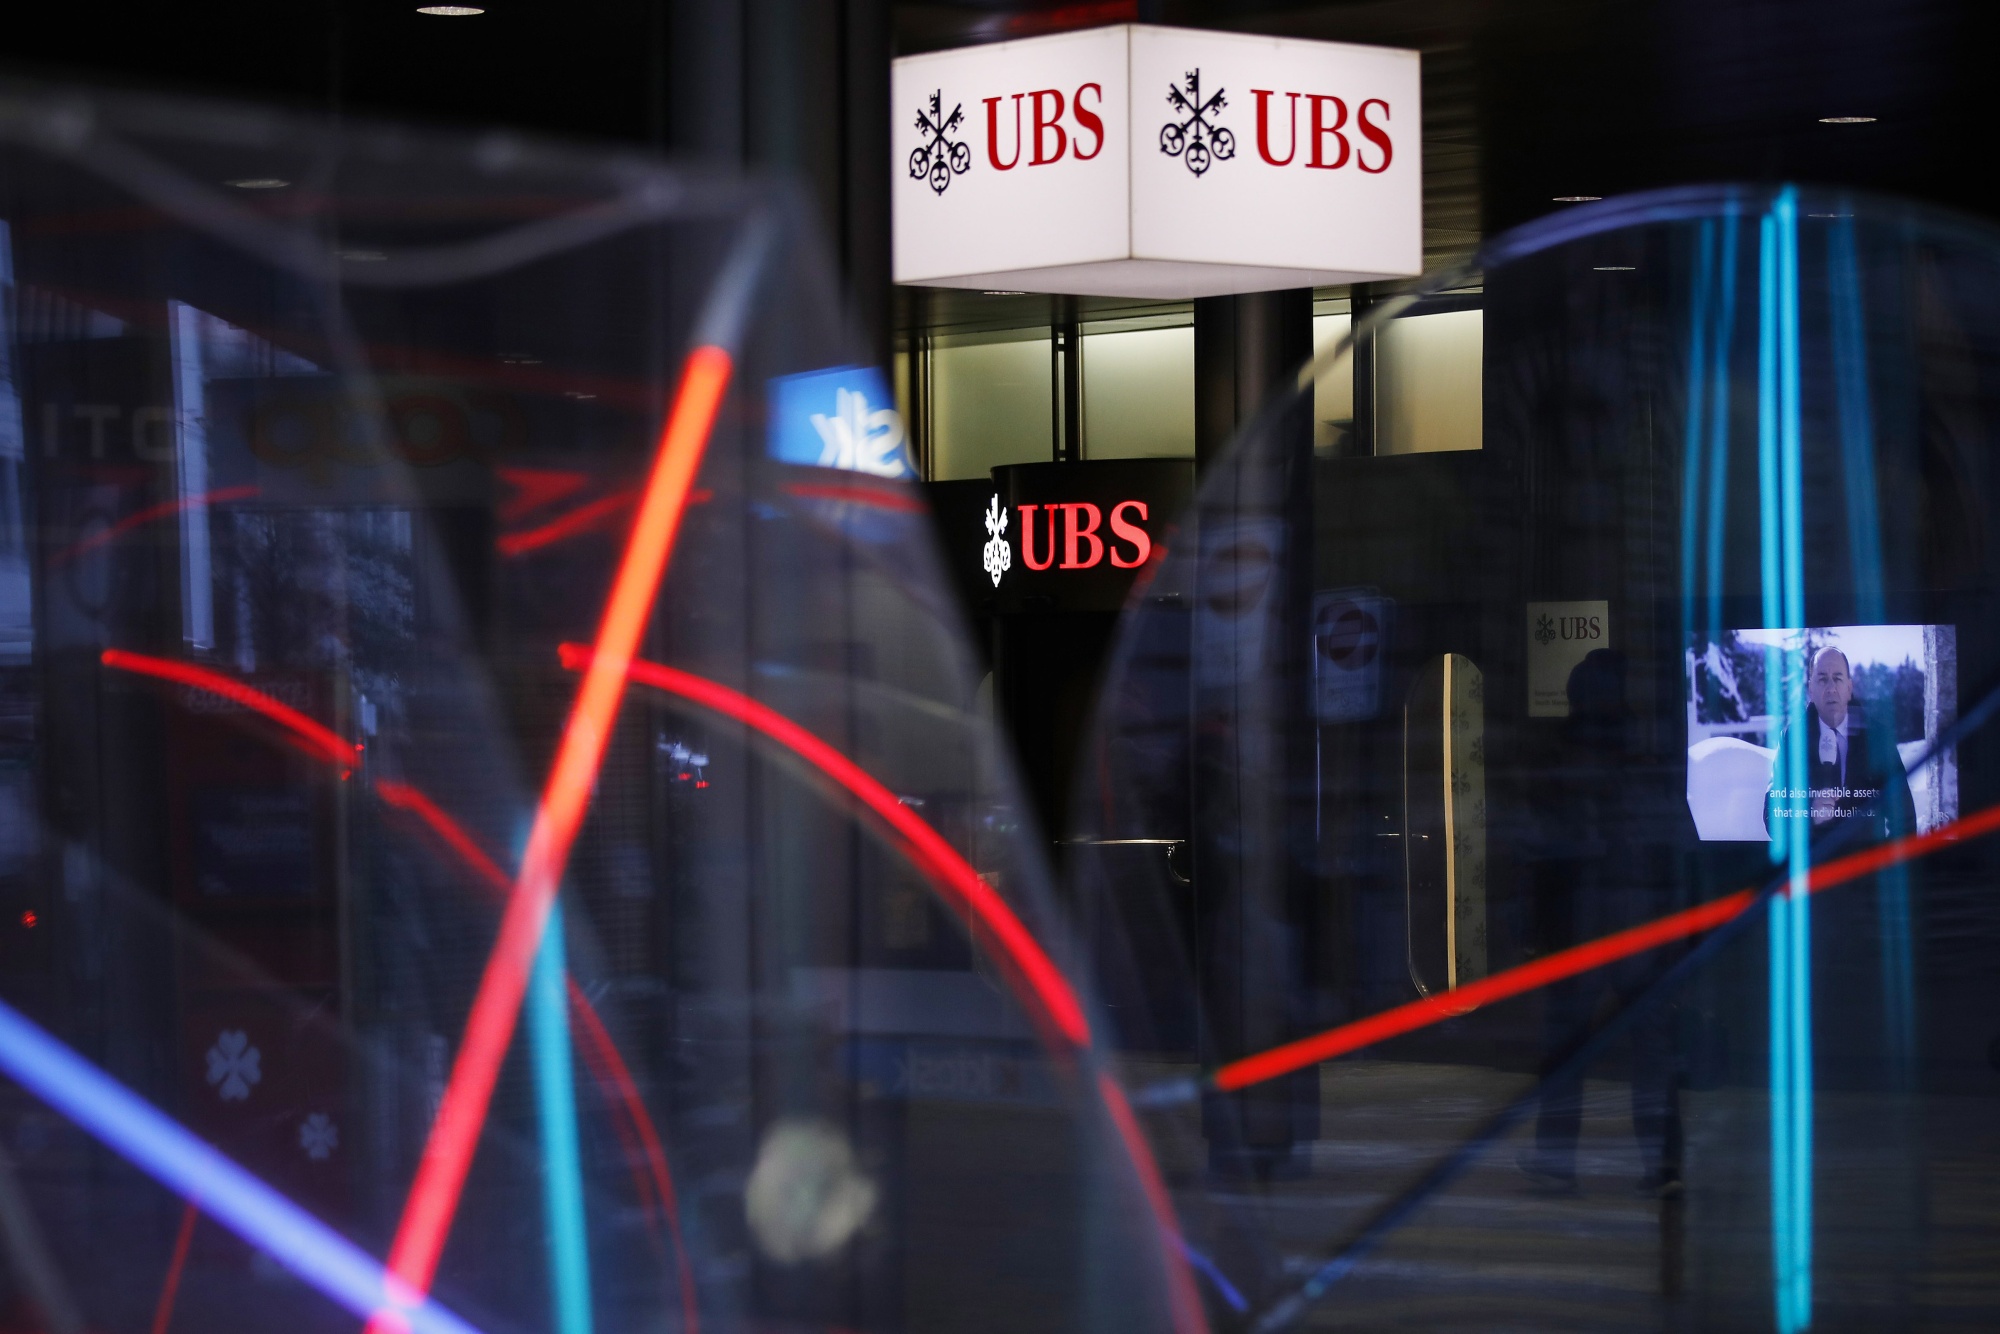 Illuminated UBS Group AG logos outside the company's headquarters in Zurich, Switzerland, on Tuesday, Jan. 26, 2020. UBS plans to buy back as much as 4 billion francs ($4.5 billion) of shares over the next three years, bolstering shareholder returns after income from managing client assets and investment banking propelled gains at the world’s largest wealth manager.